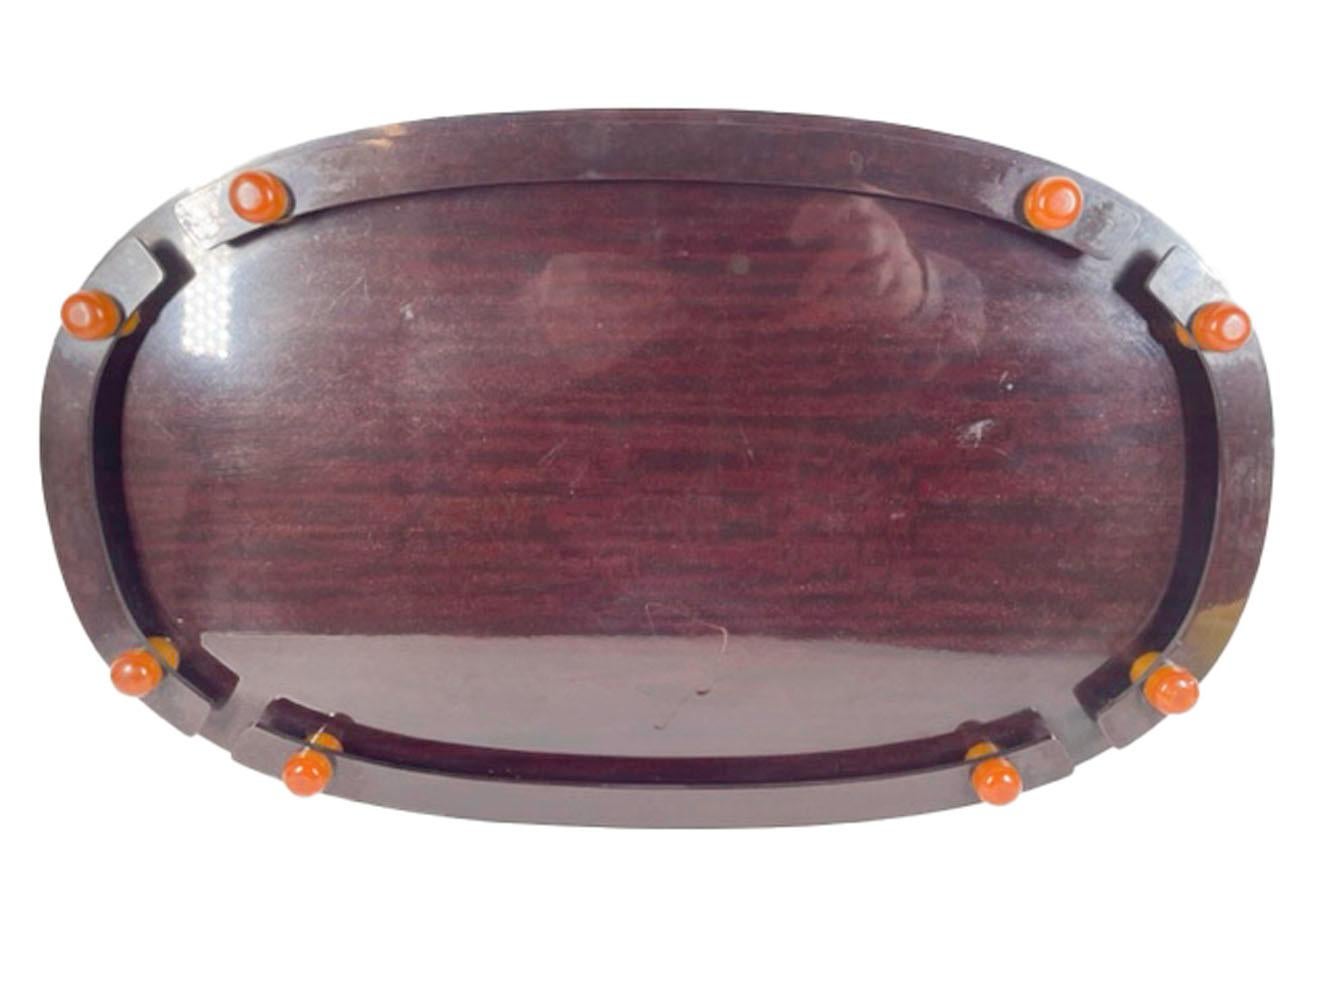 20th Century Art Deco Galleried Cocktail Tray in Faux Rosewood and Butterscotch Bakelite